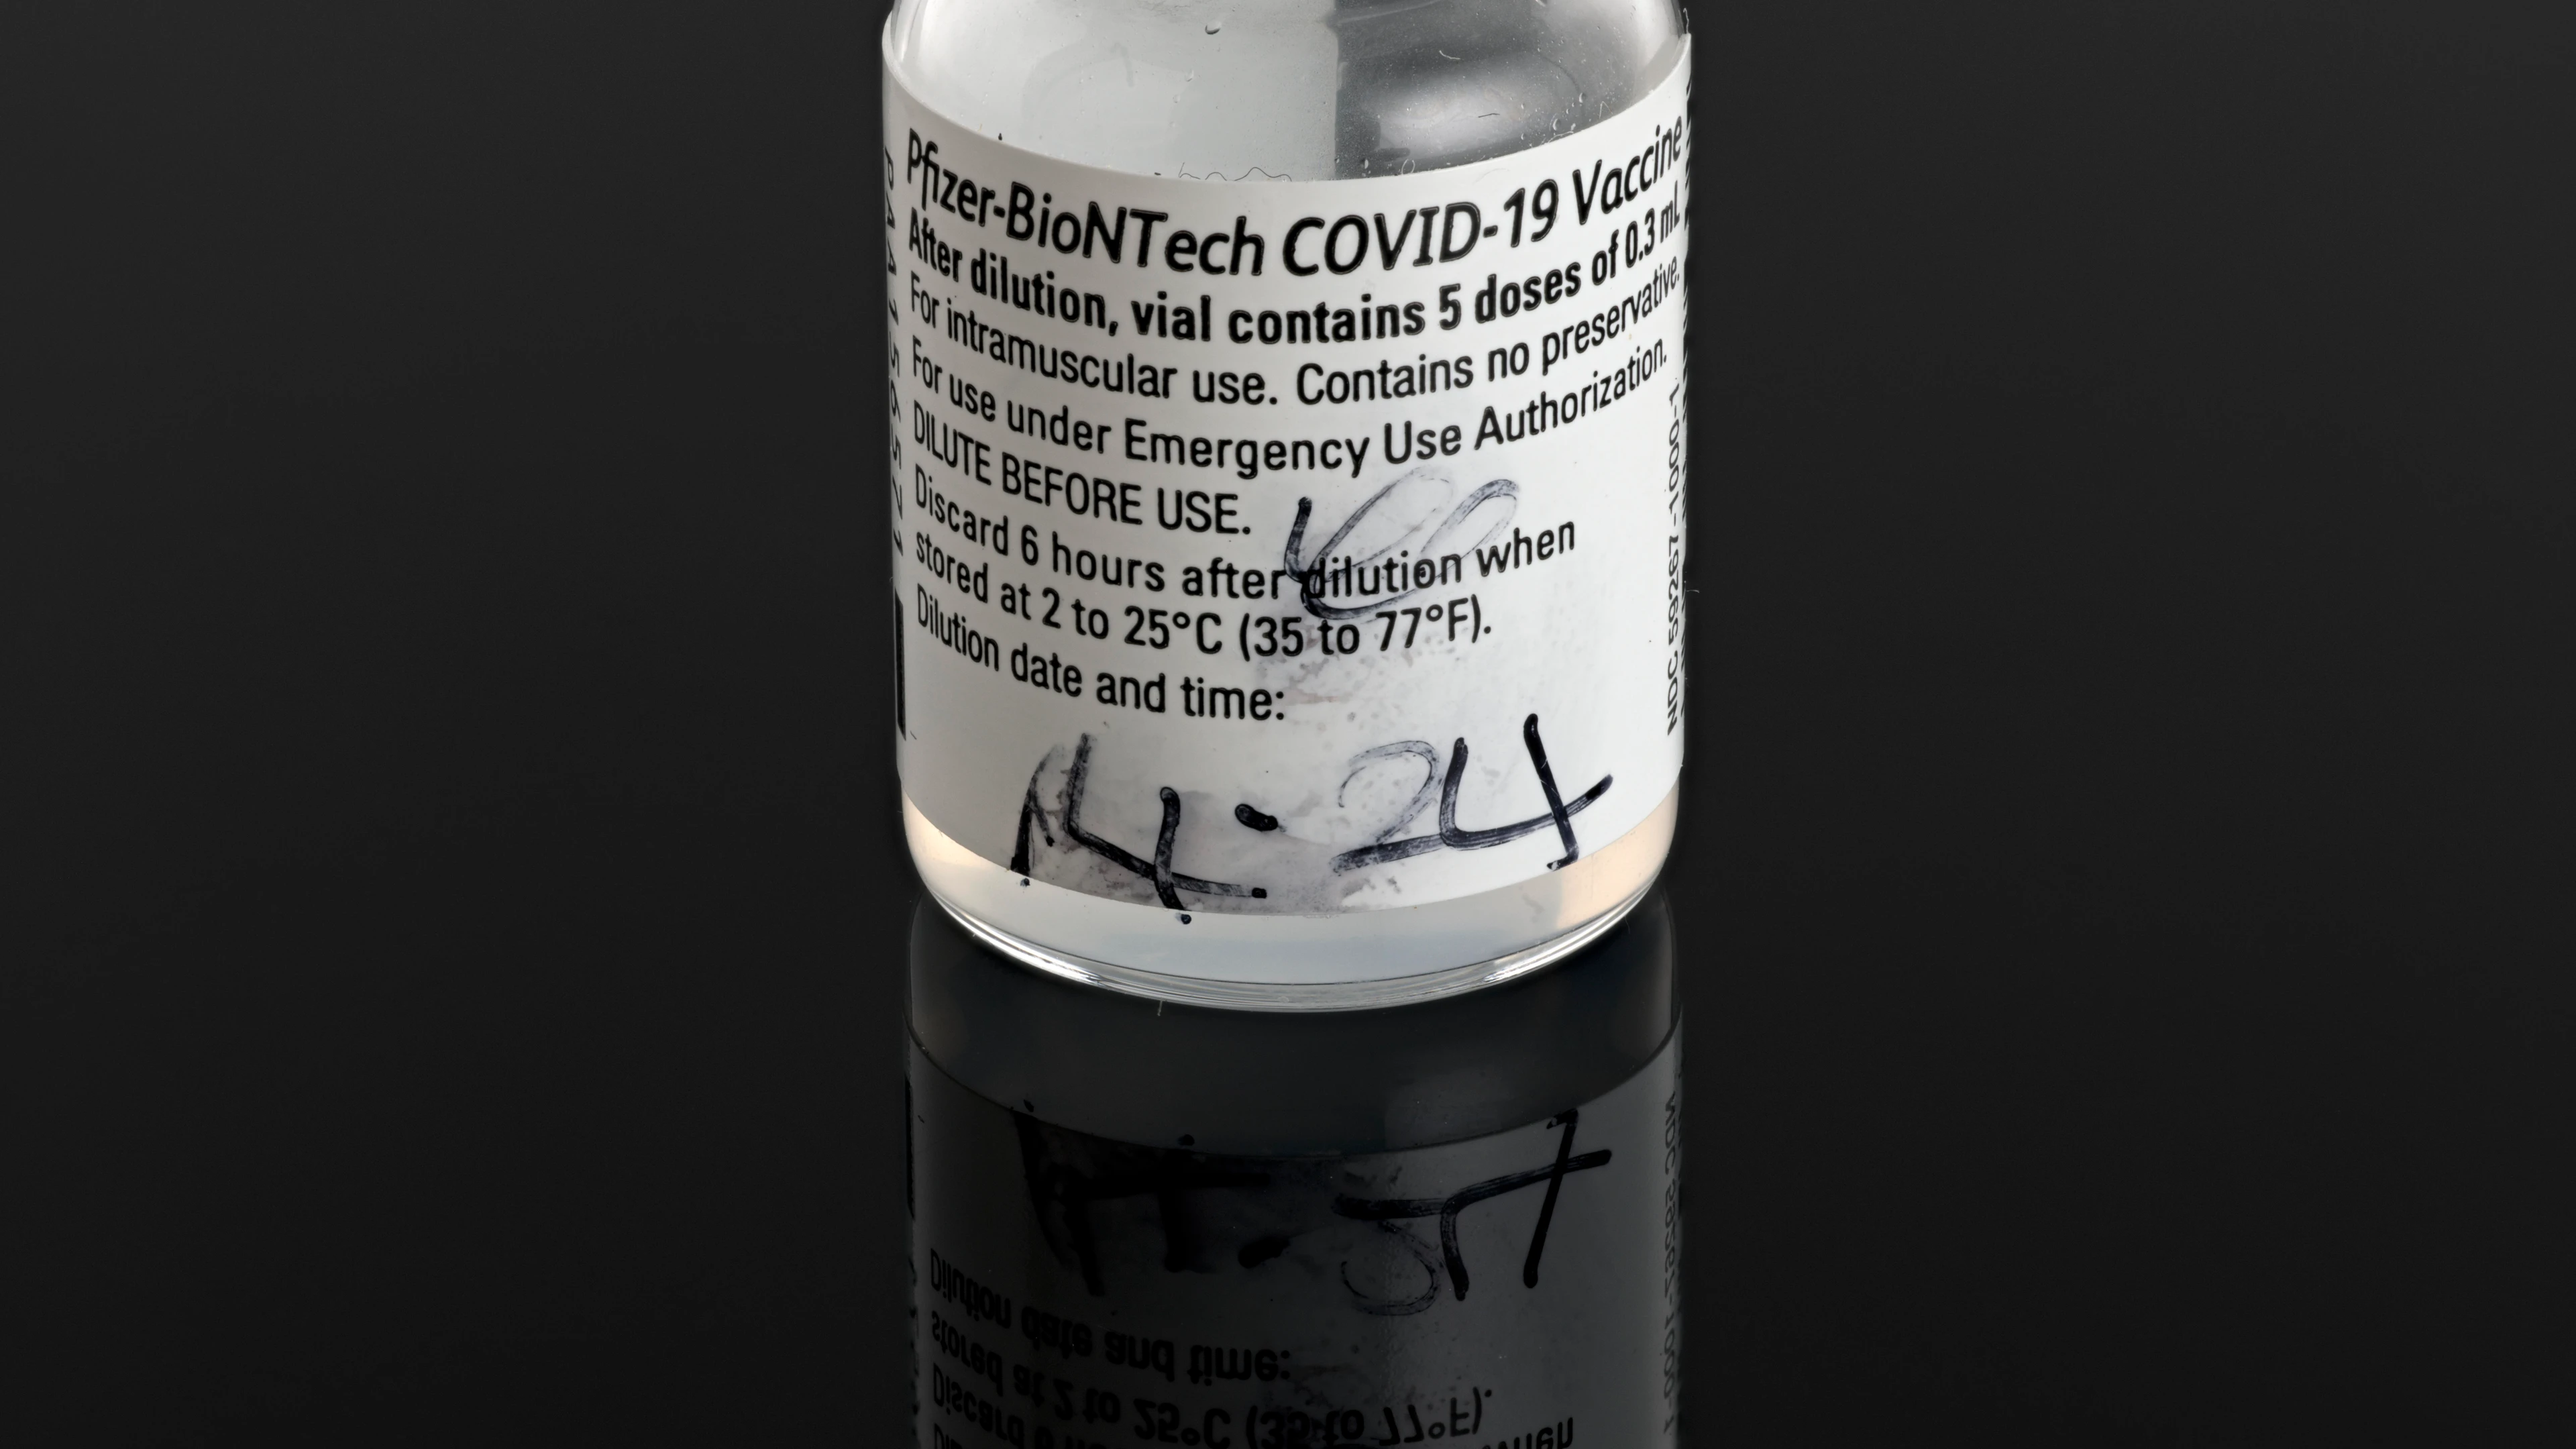 Glass vial that held Margaret Keenan's first Pfizer-BioNTech COVID-19 vaccine